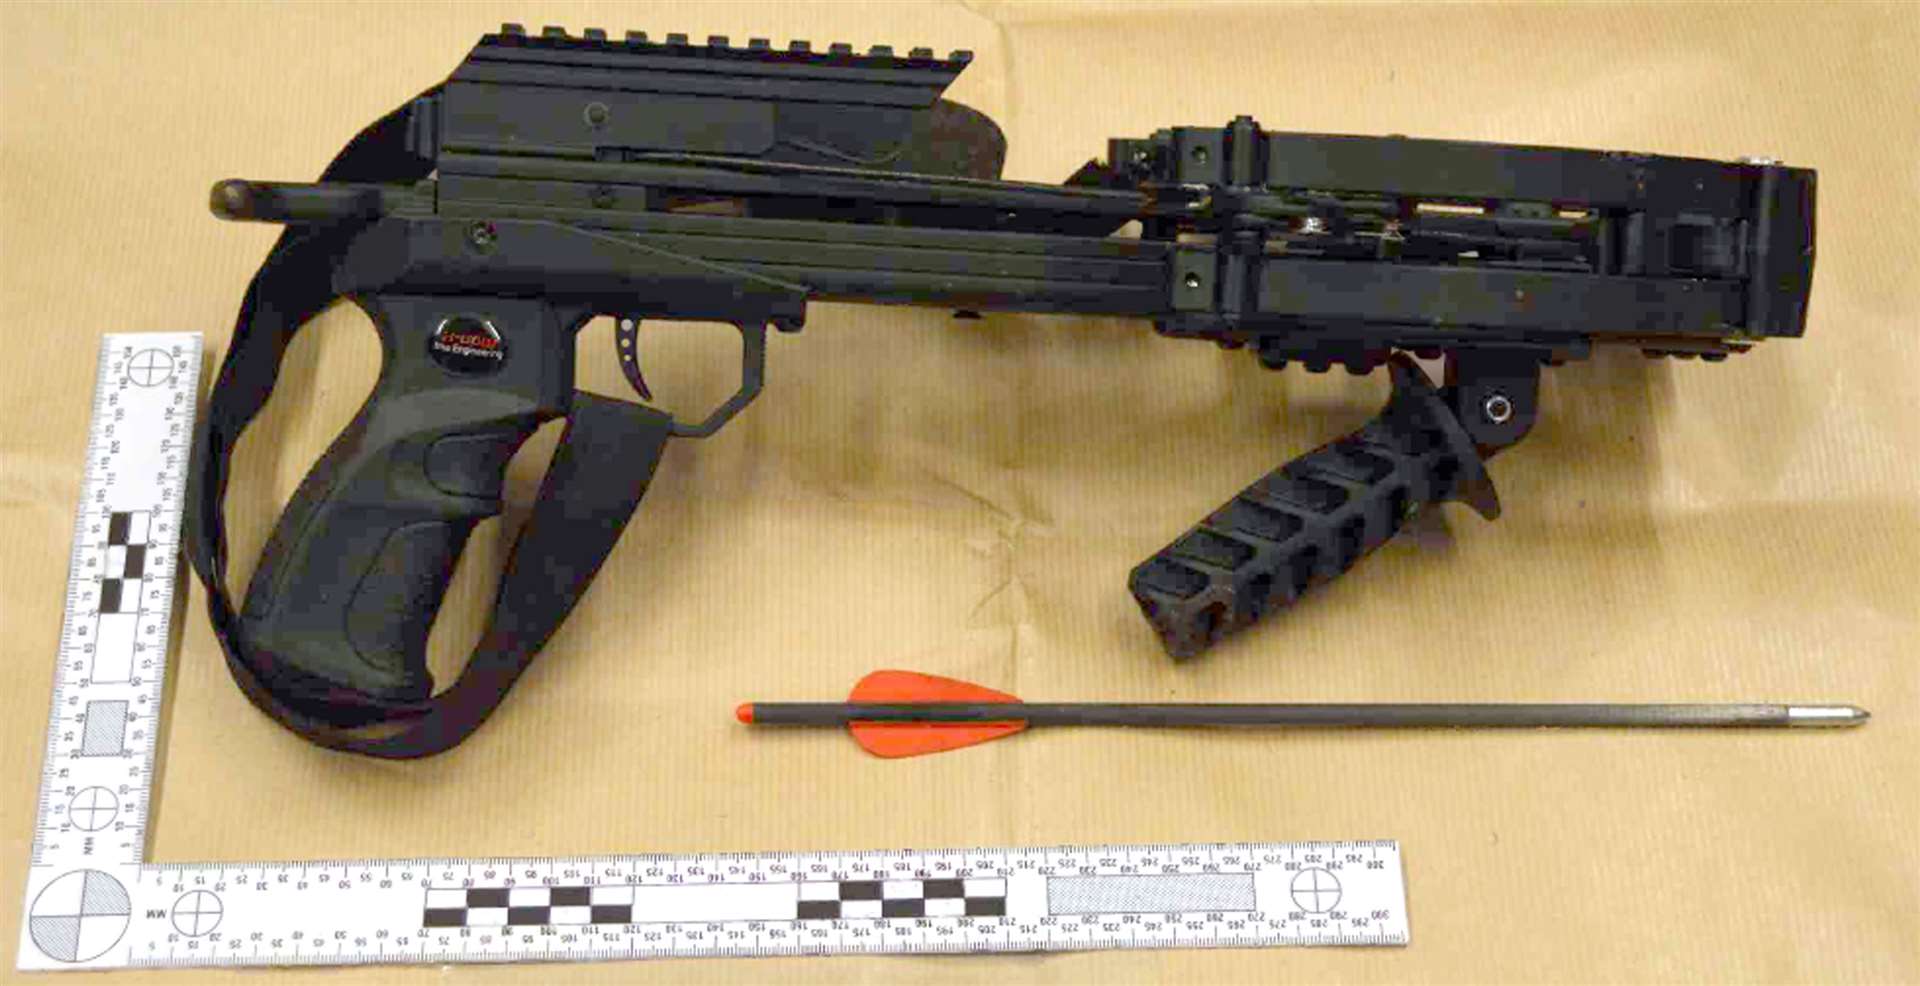 The crossbow Chail was carrying when arrested in the grounds of Windsor Castle (CPS/PA)